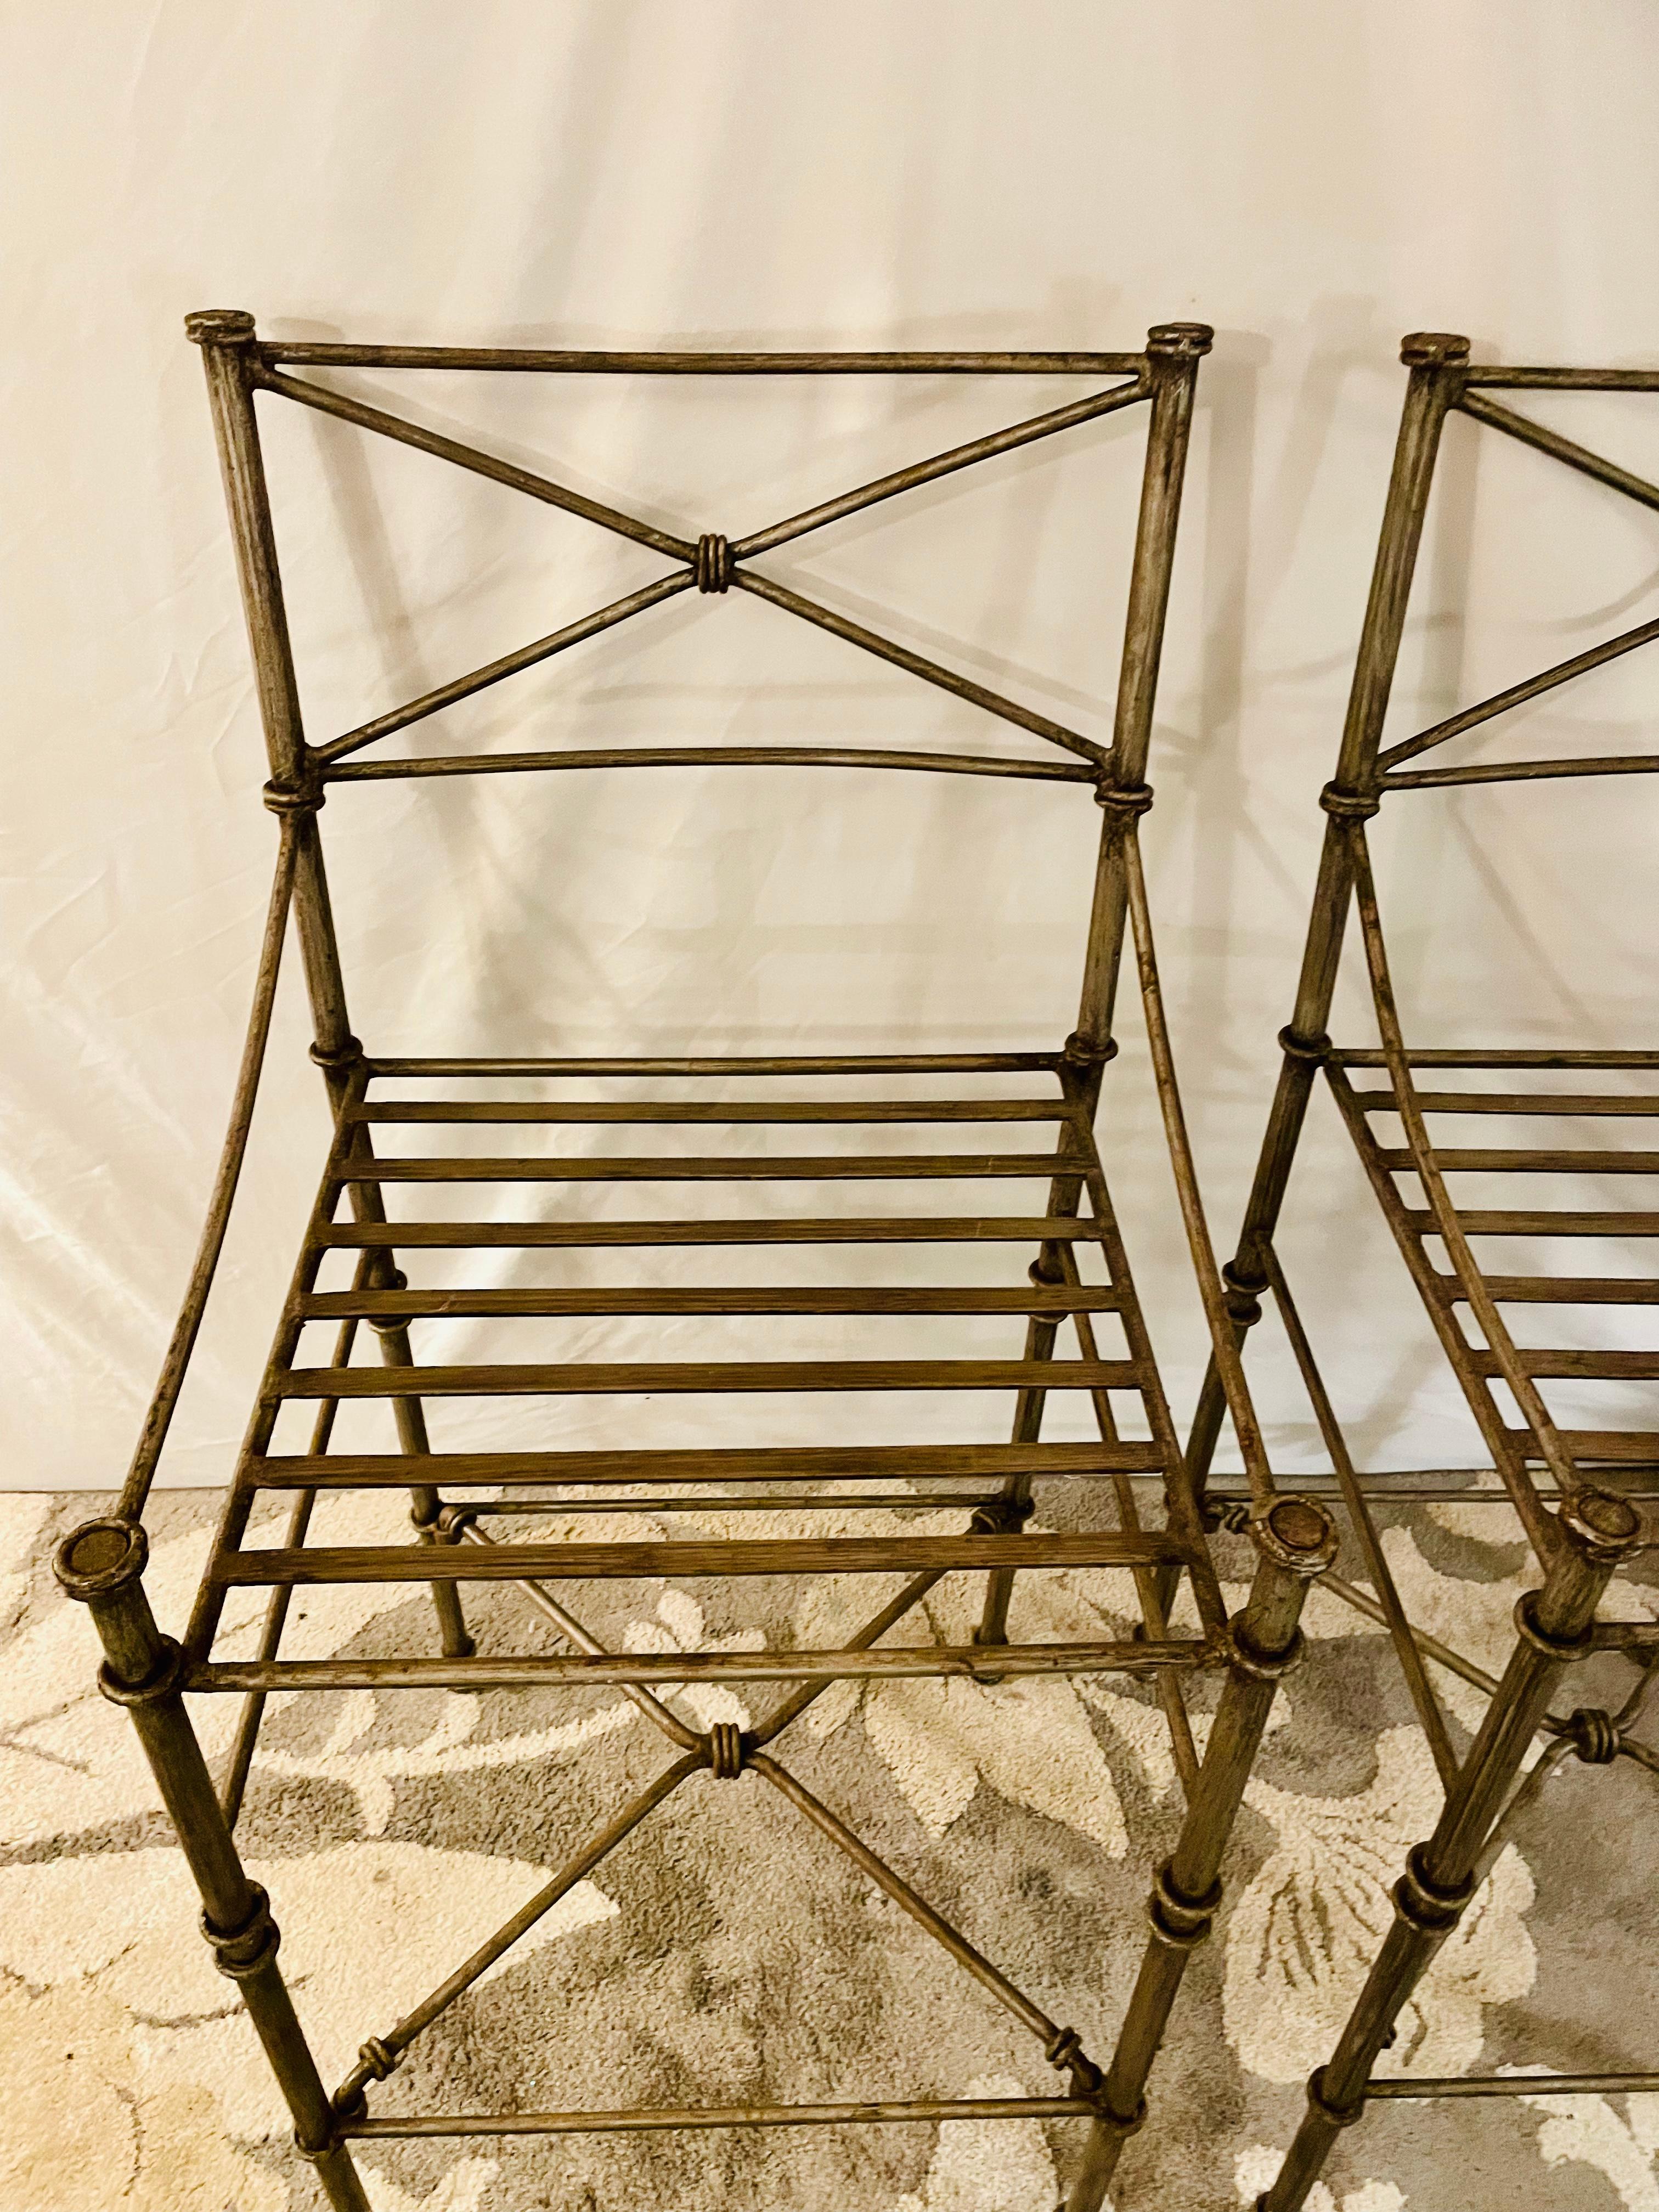 Giacometti inspired Wrought iron chairs A Set of 4 Bar Stool Dining Chairs

In stock and read to ship is this set of four heavy iron garden chairs, coated with an exquisite aged pewter style finish. This set is a great addition to any deck, garden,